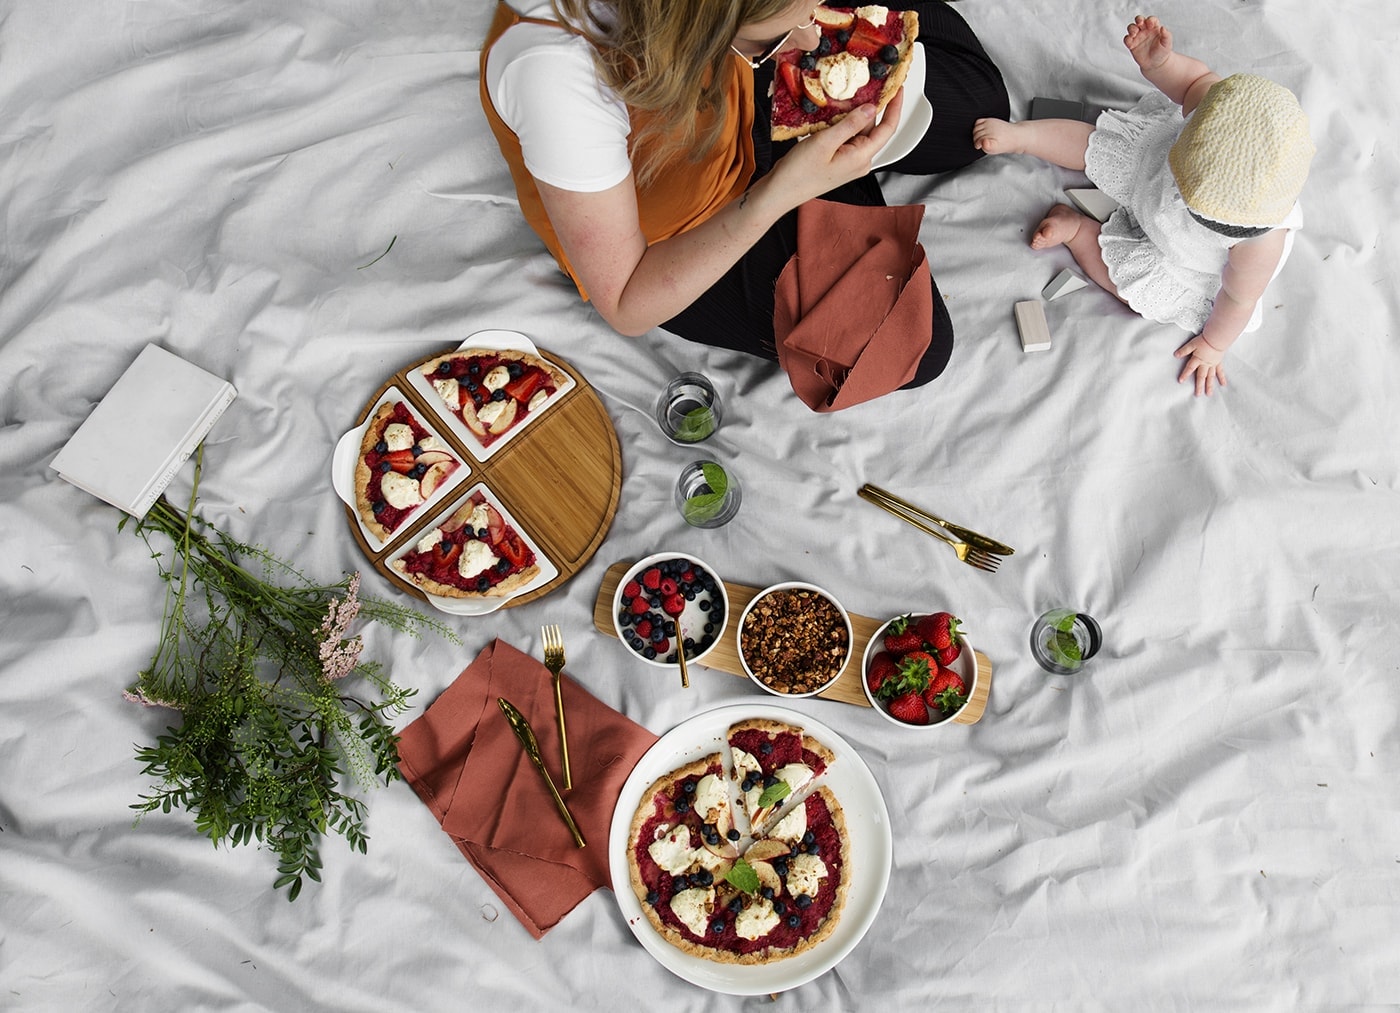 Brunch-time Picnic Pizza Perfection with Villeroy & Boch